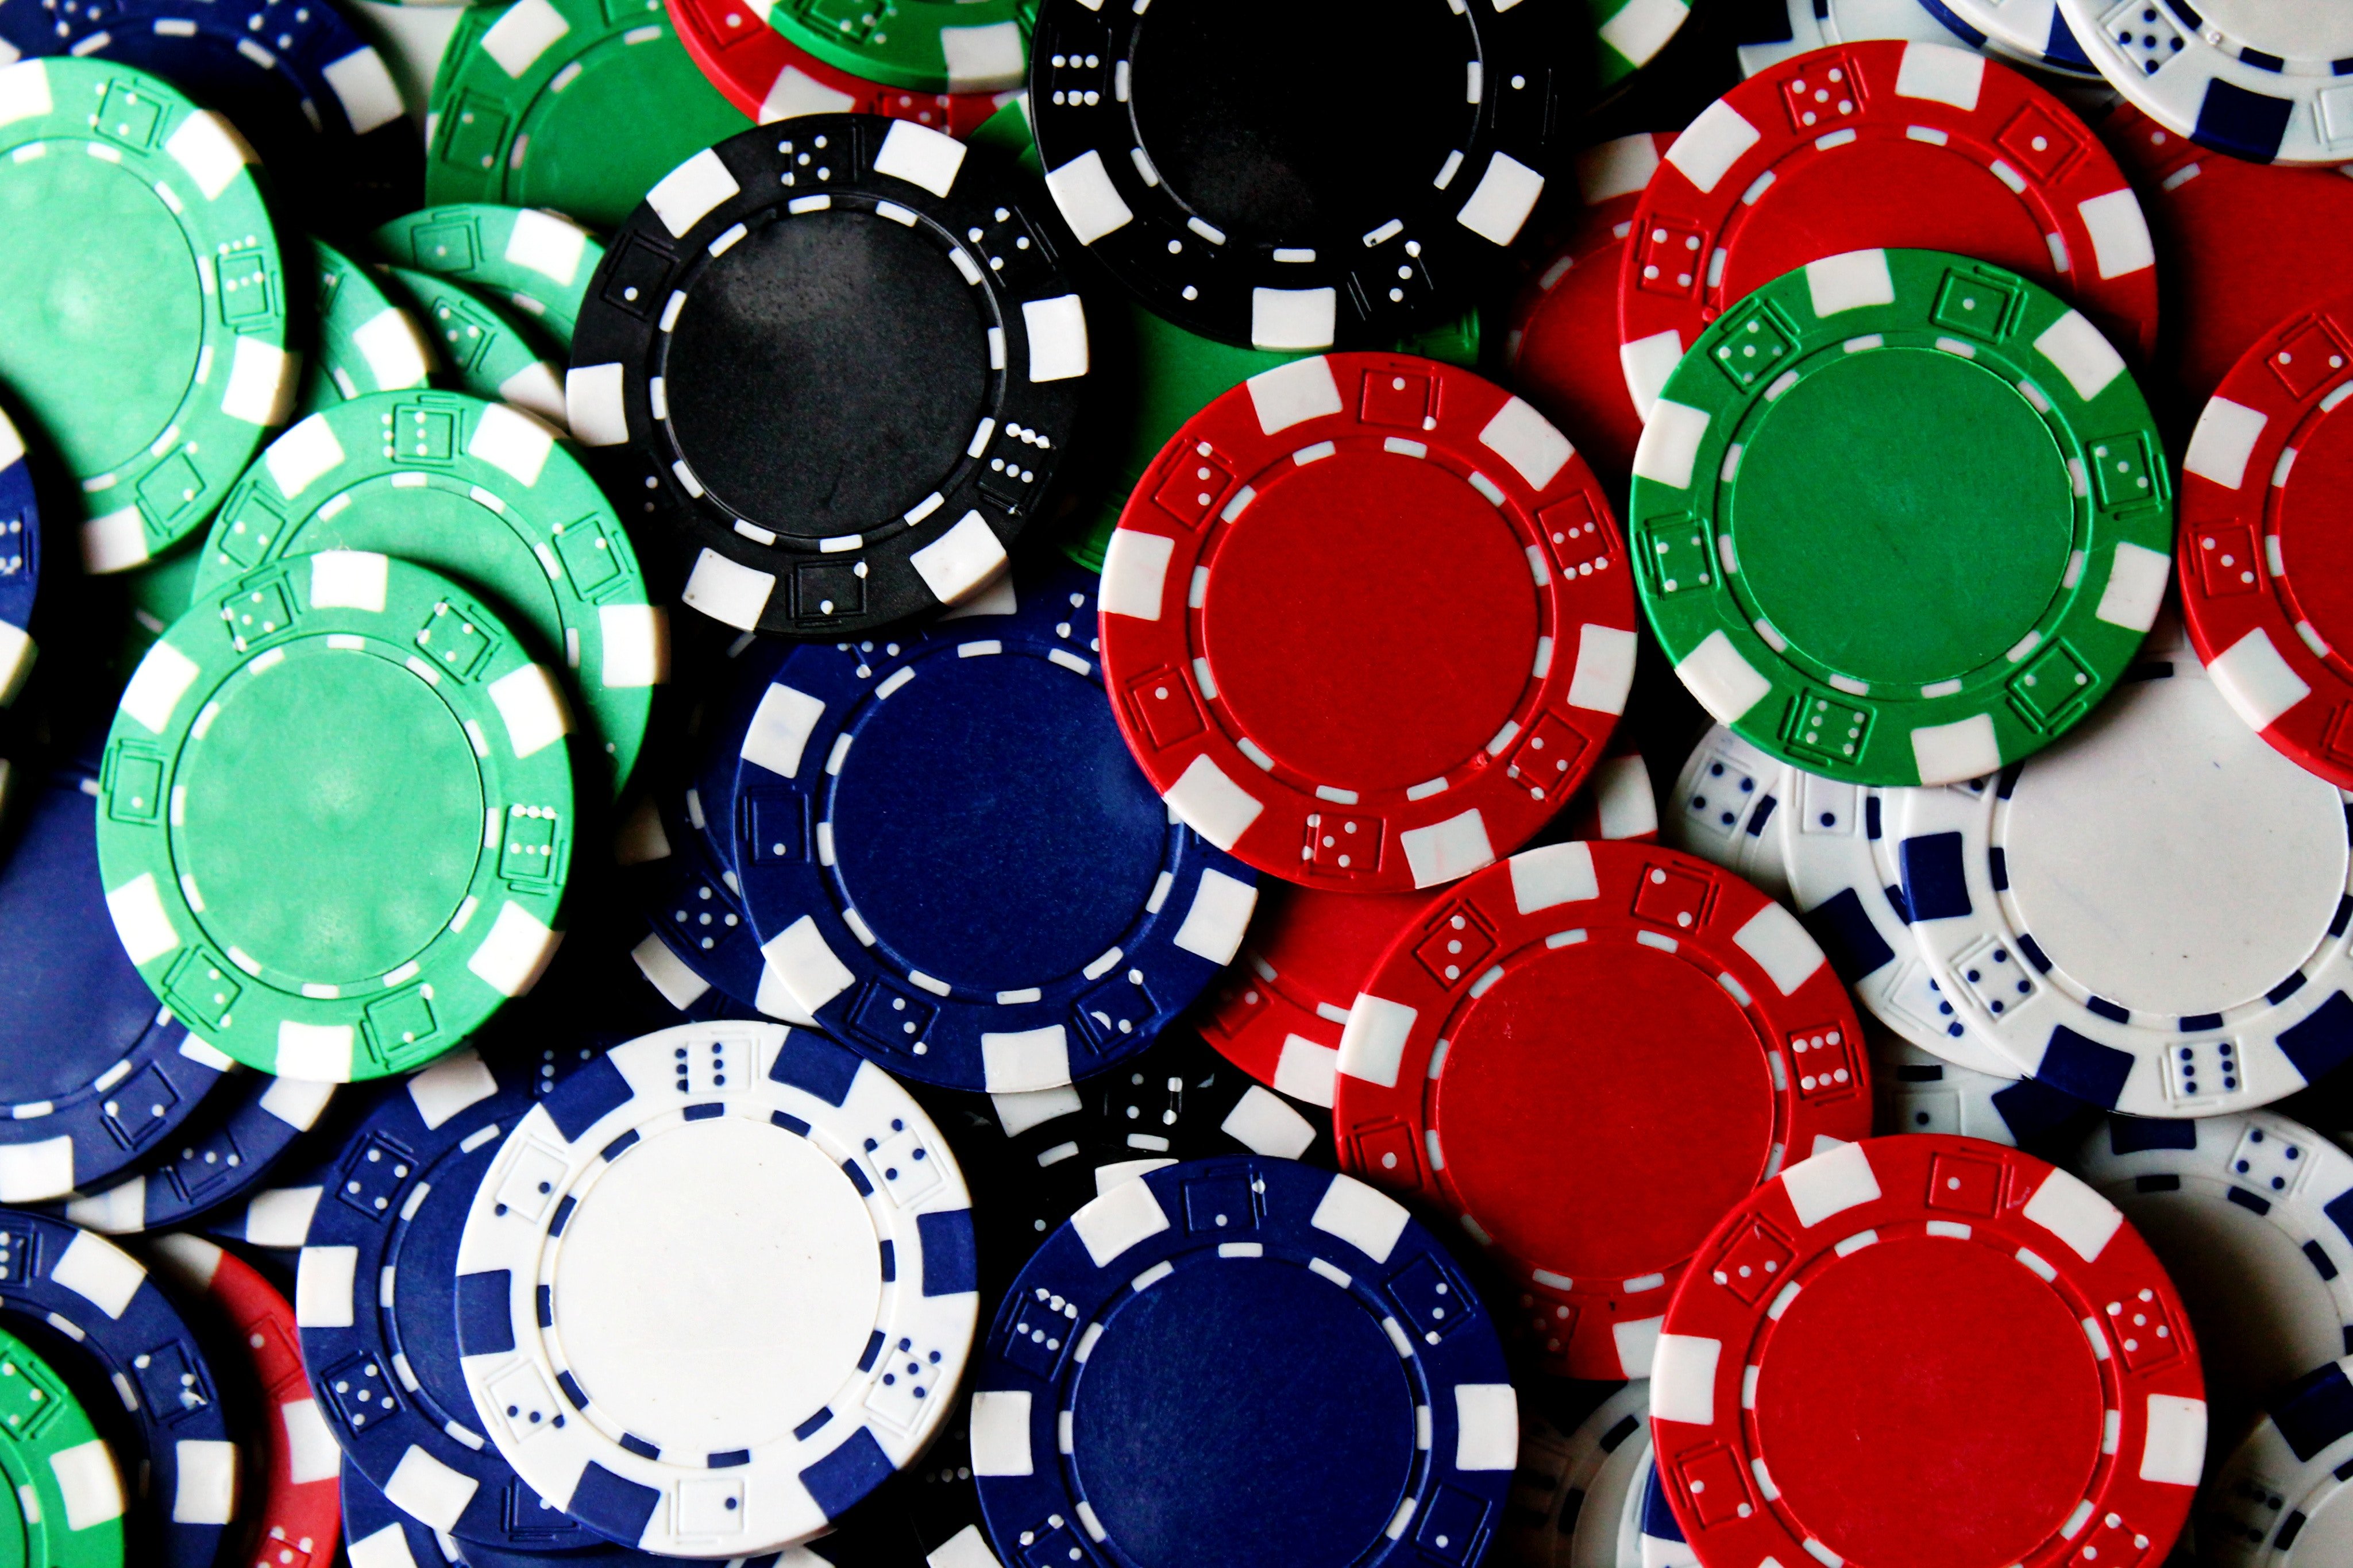 How to Tell a Real Casino Chip from a Fake One